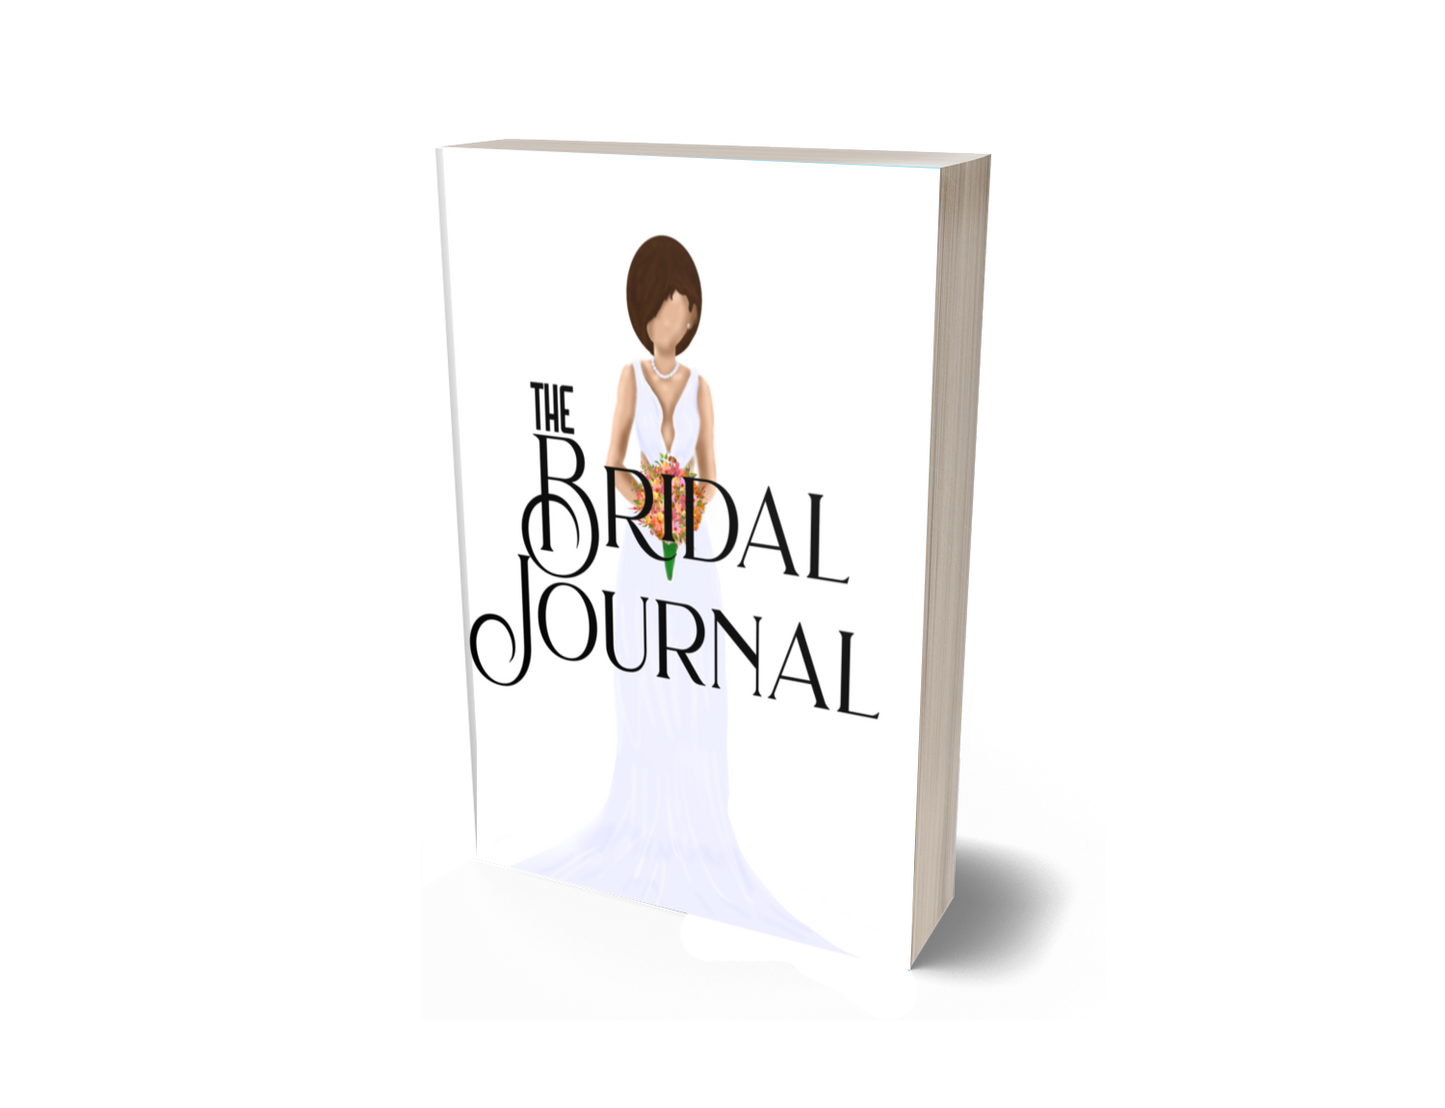 The Bridal Journal